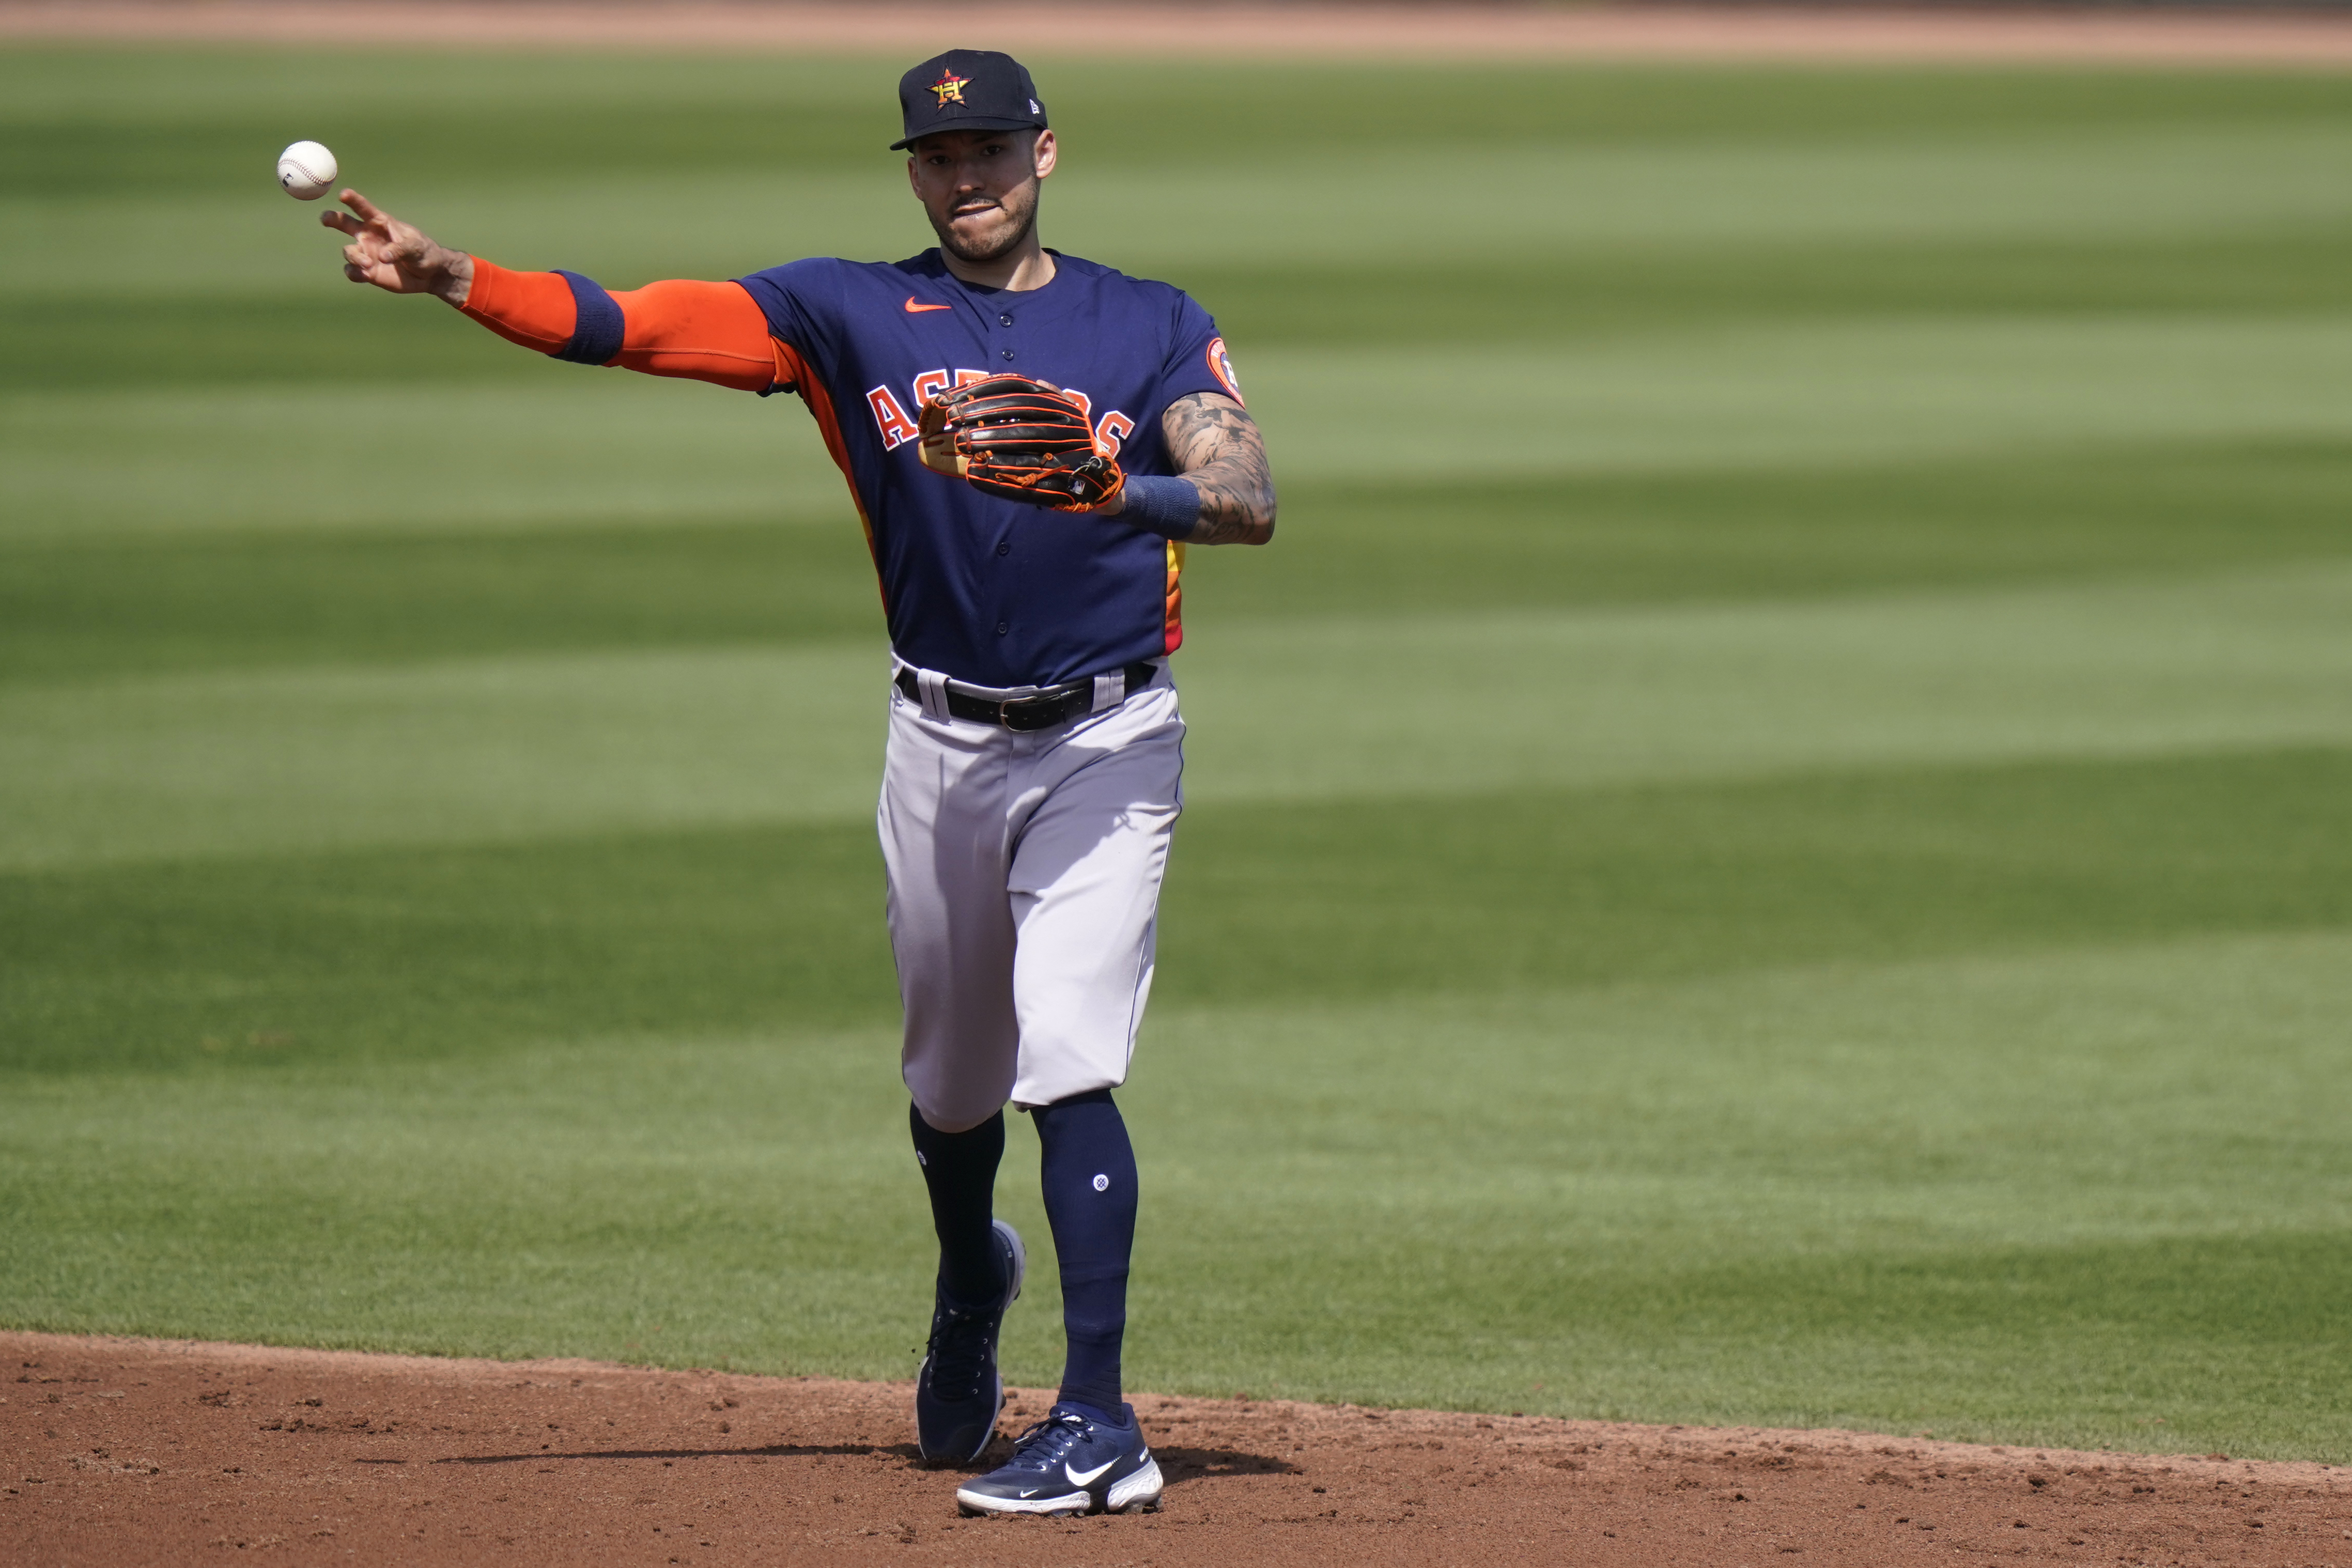 Pitchers are throwing Carlos Correa more strikes, and he is making